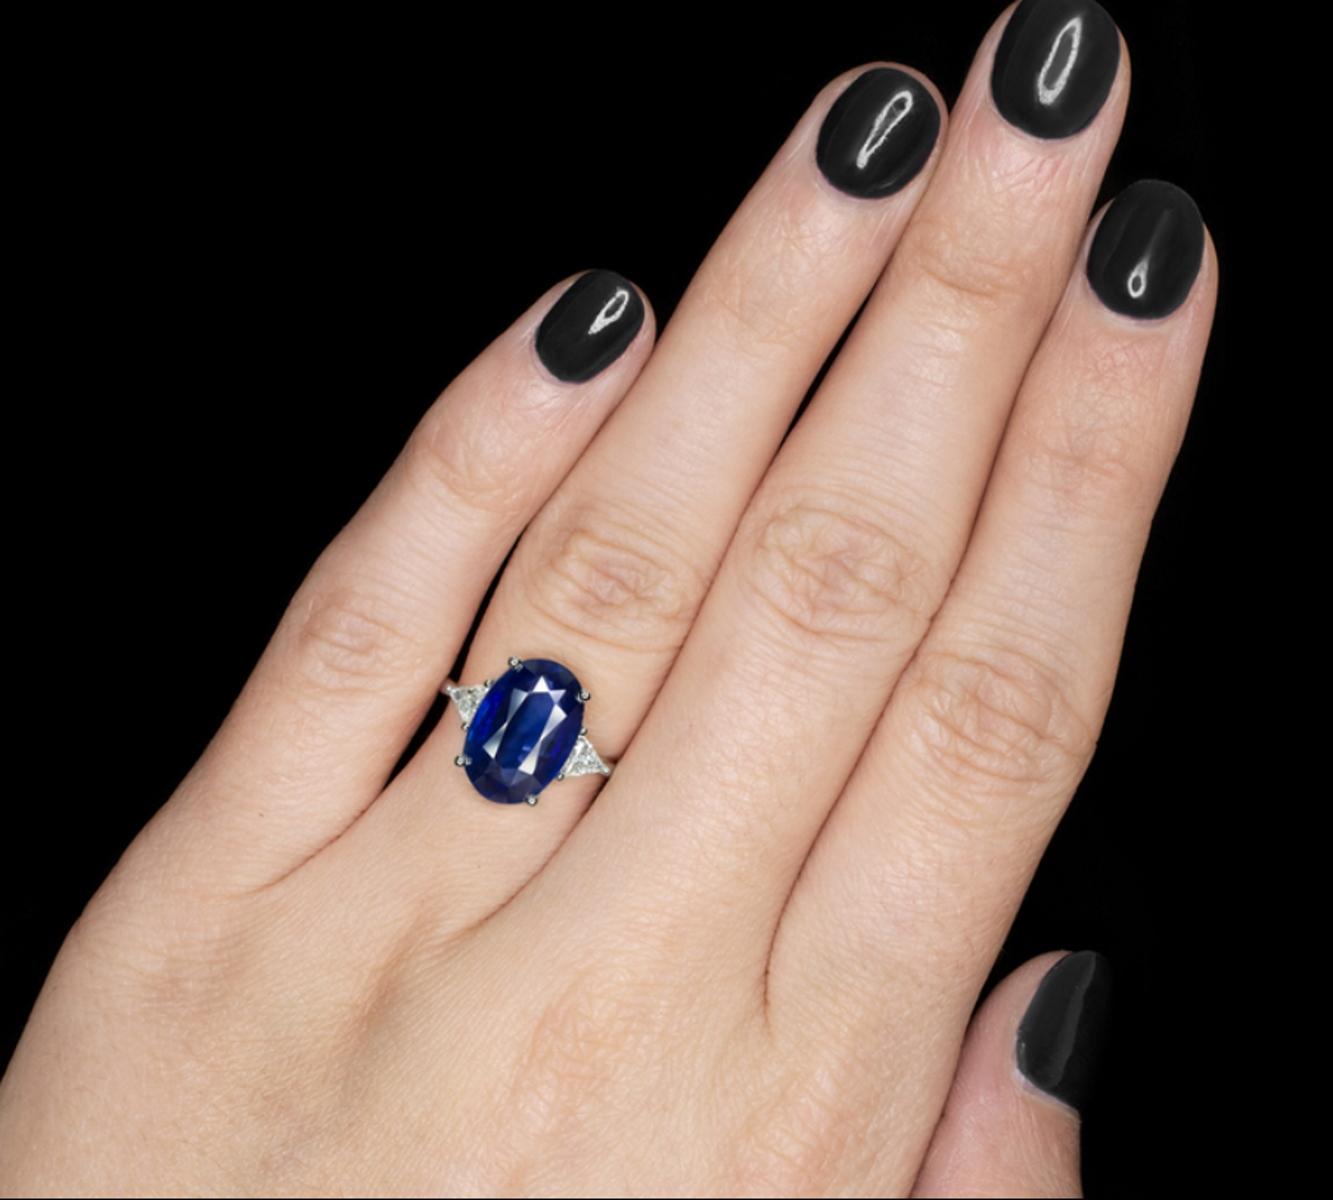 Sophisticated sapphire Untreated Royal Blue Sapphire, a Natural Wonder from Ceylon (Sri Lanka):

Geographic Origin: Ceylon (Sri Lanka), renowned for its exceptional gemstones.
Treatments: No Treatments (Unheated/Untreated), preserving its natural